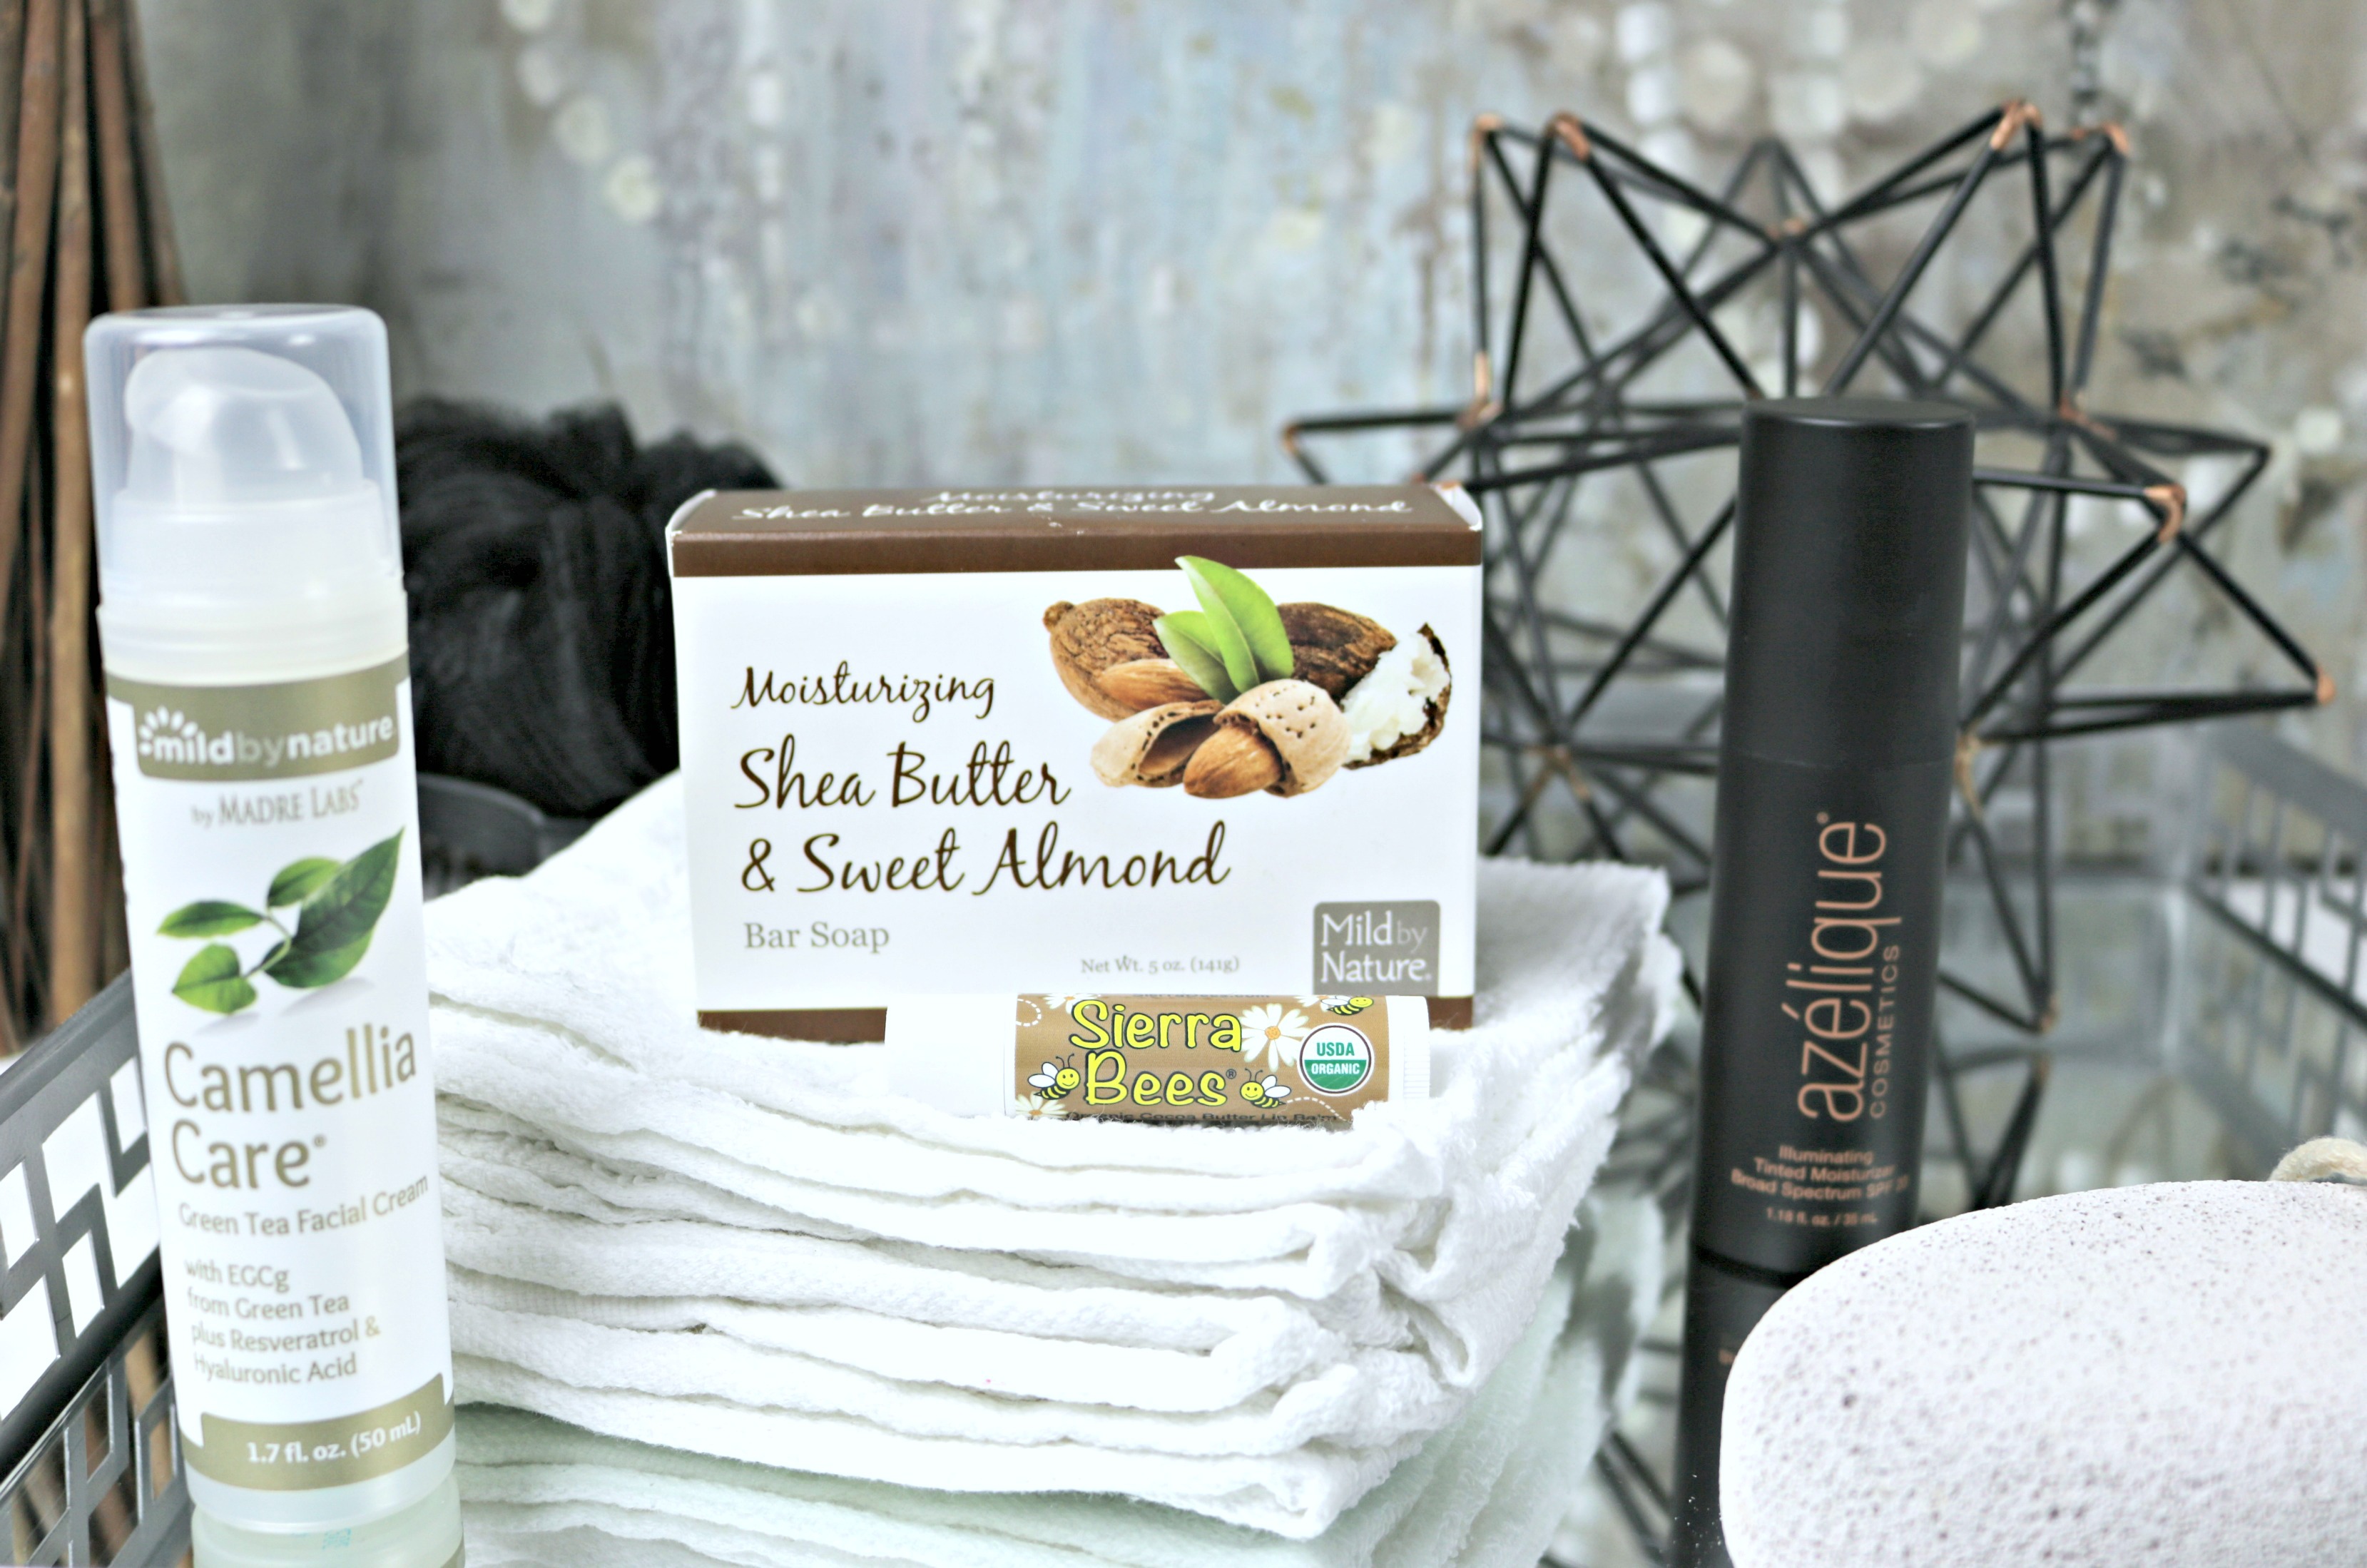 Moisturizing Shea Butter & Sweet Almond soap by Mild by Nature with other skin essentials.